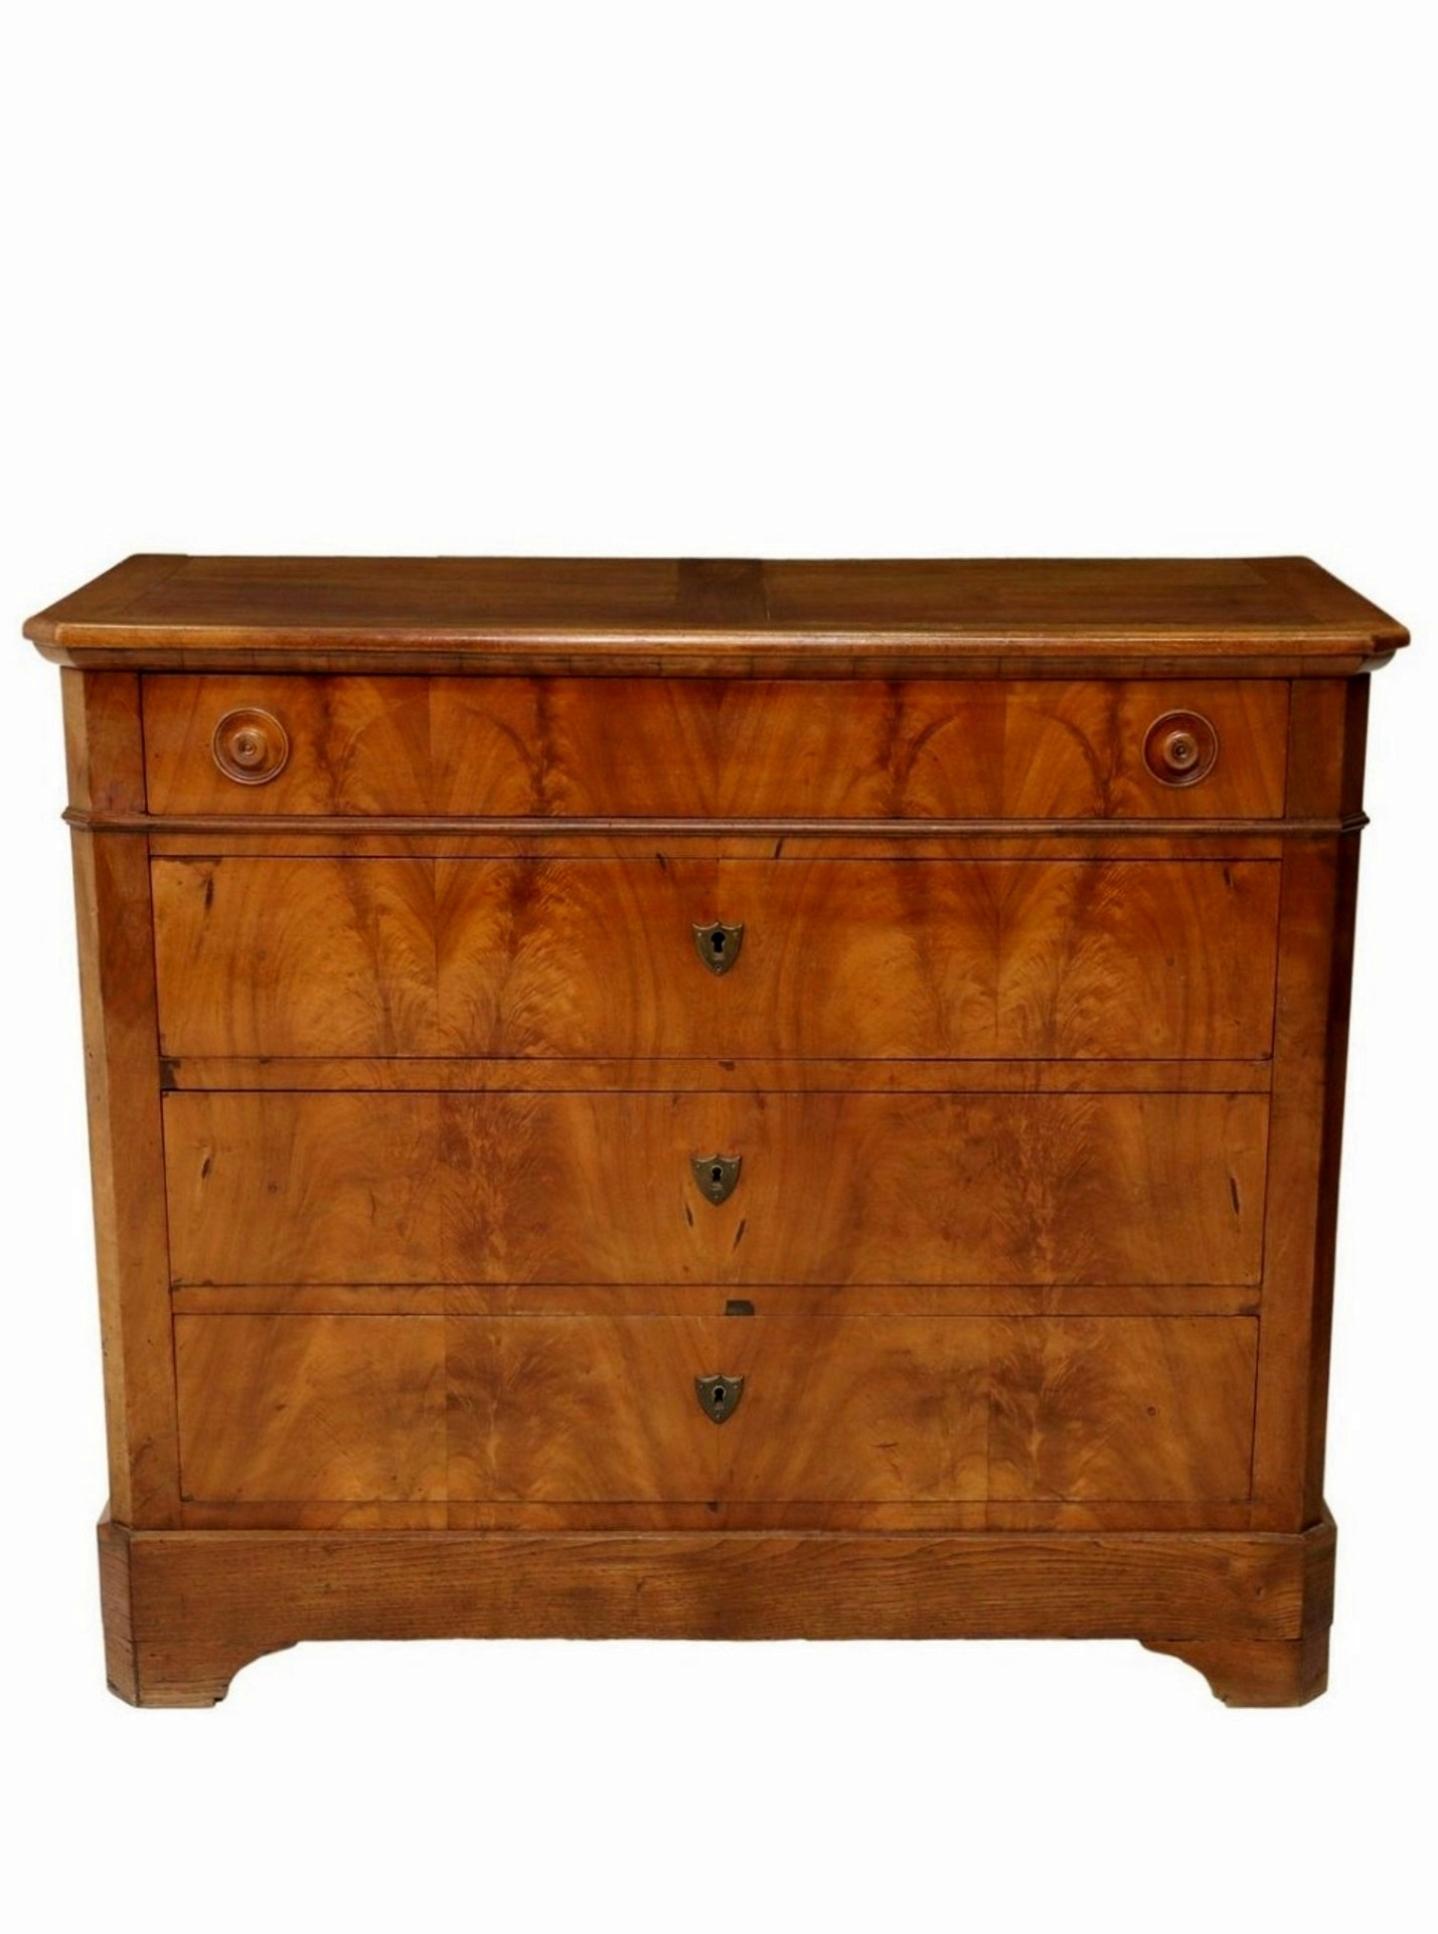 A classic French Louis Philippe Period (1830-1848) chest of drawers.

Hand-crafted in France in the mid-19th century, featuring bookmatched highly figured crotch flame mahogany and warm rich walnut, high-quality solid wood construction, having a